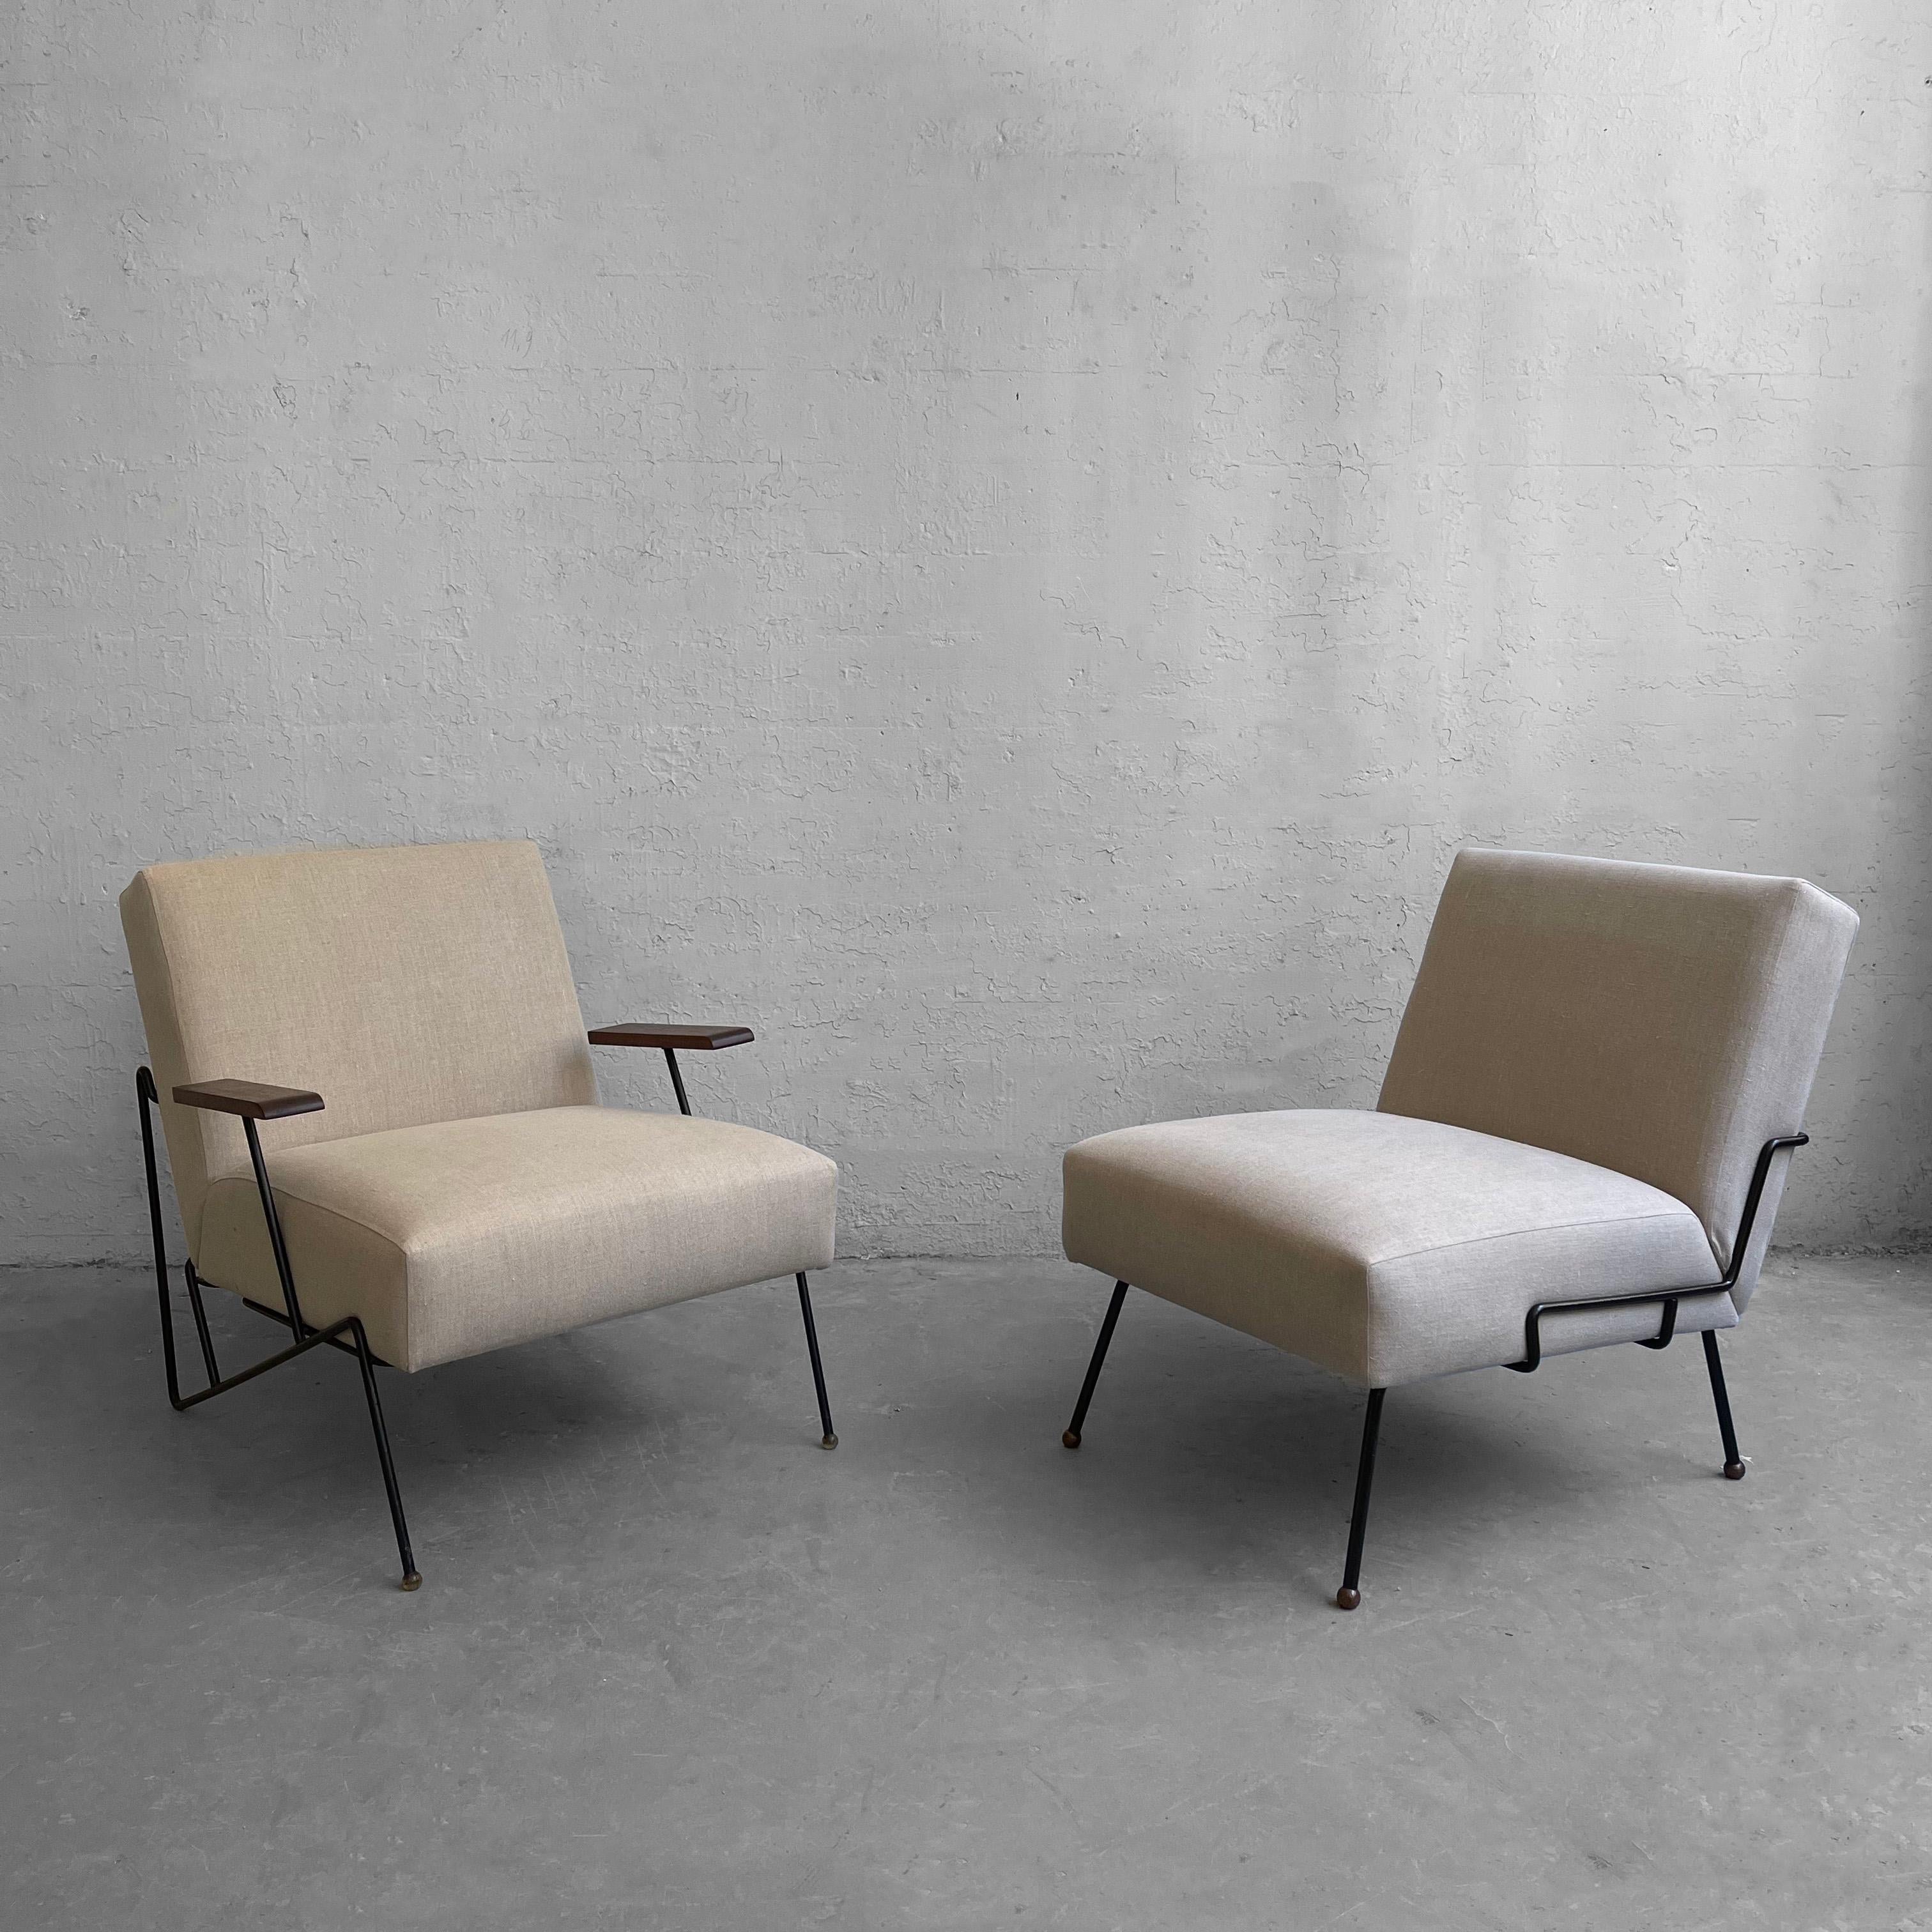 Mid-Century Modern, lounge chair set by Dan Johnson for Pacific Iron features an armchair and slipper chair with minimal wrought iron frames with wood armrests and newly upholstered bodies in cream cotton linen blend that seem to float within the